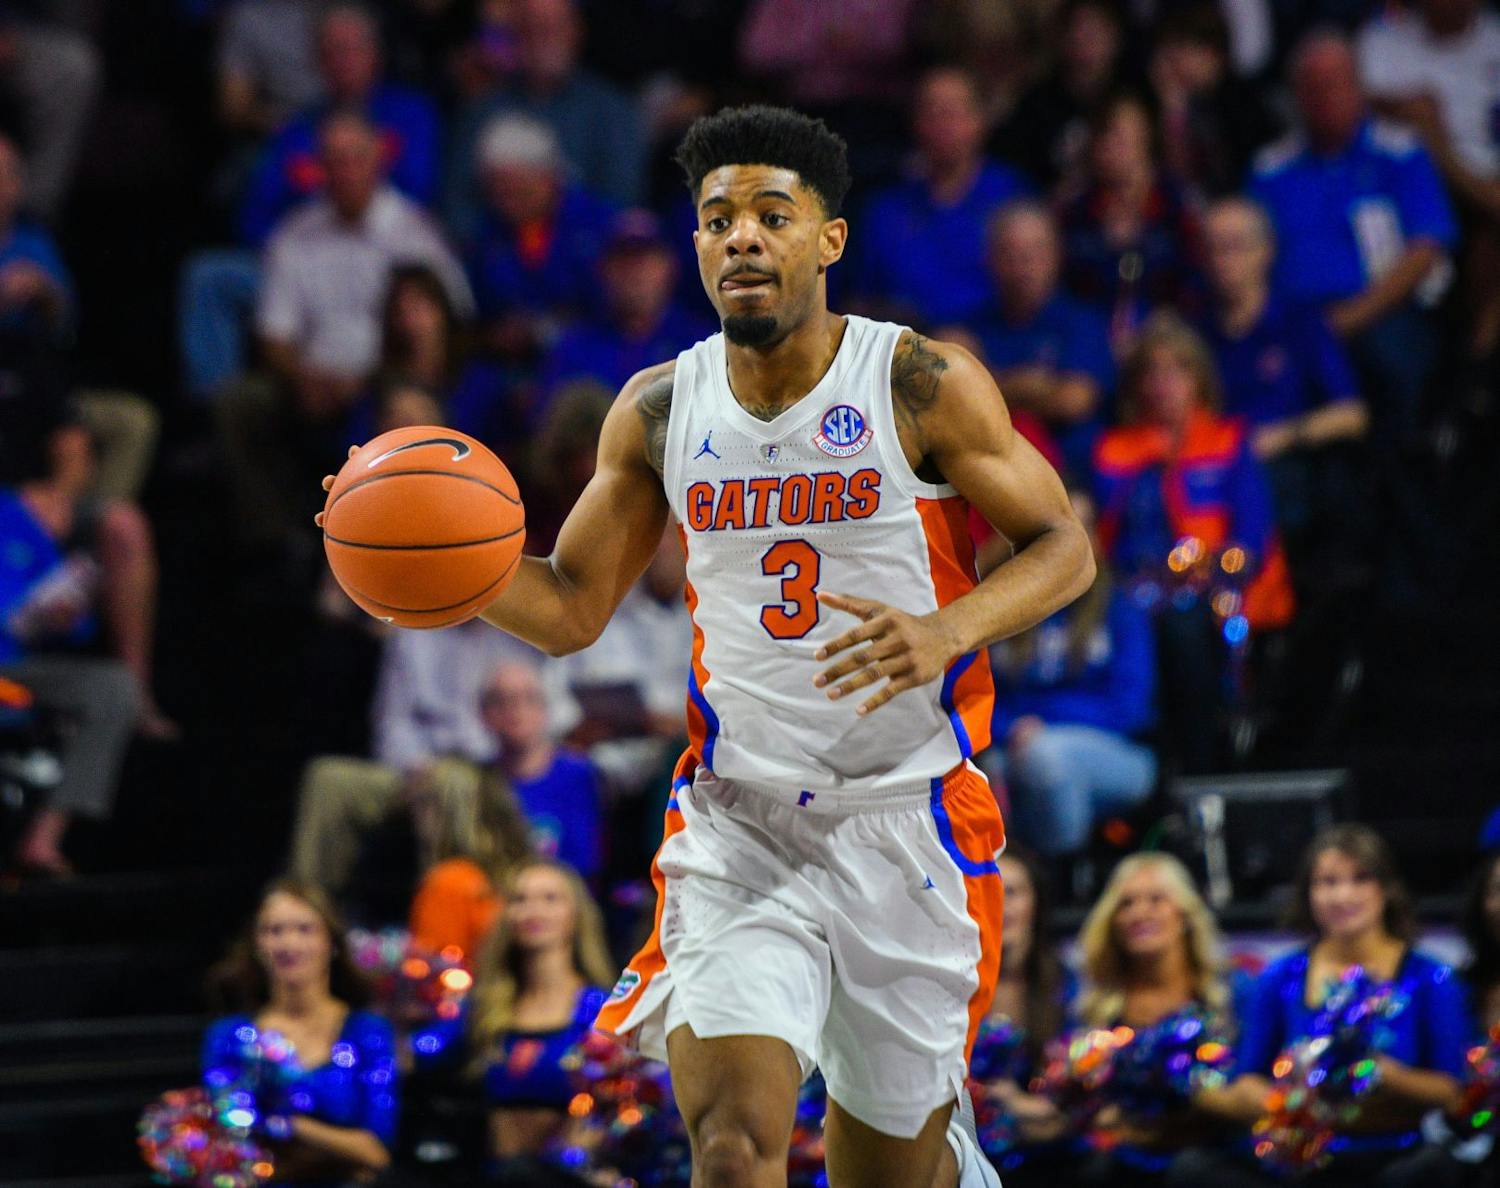 Senior guard Jalen Hudson scored 16 points in the Gators' 65-62 loss to Auburn in the SEC Tournament semifinals.